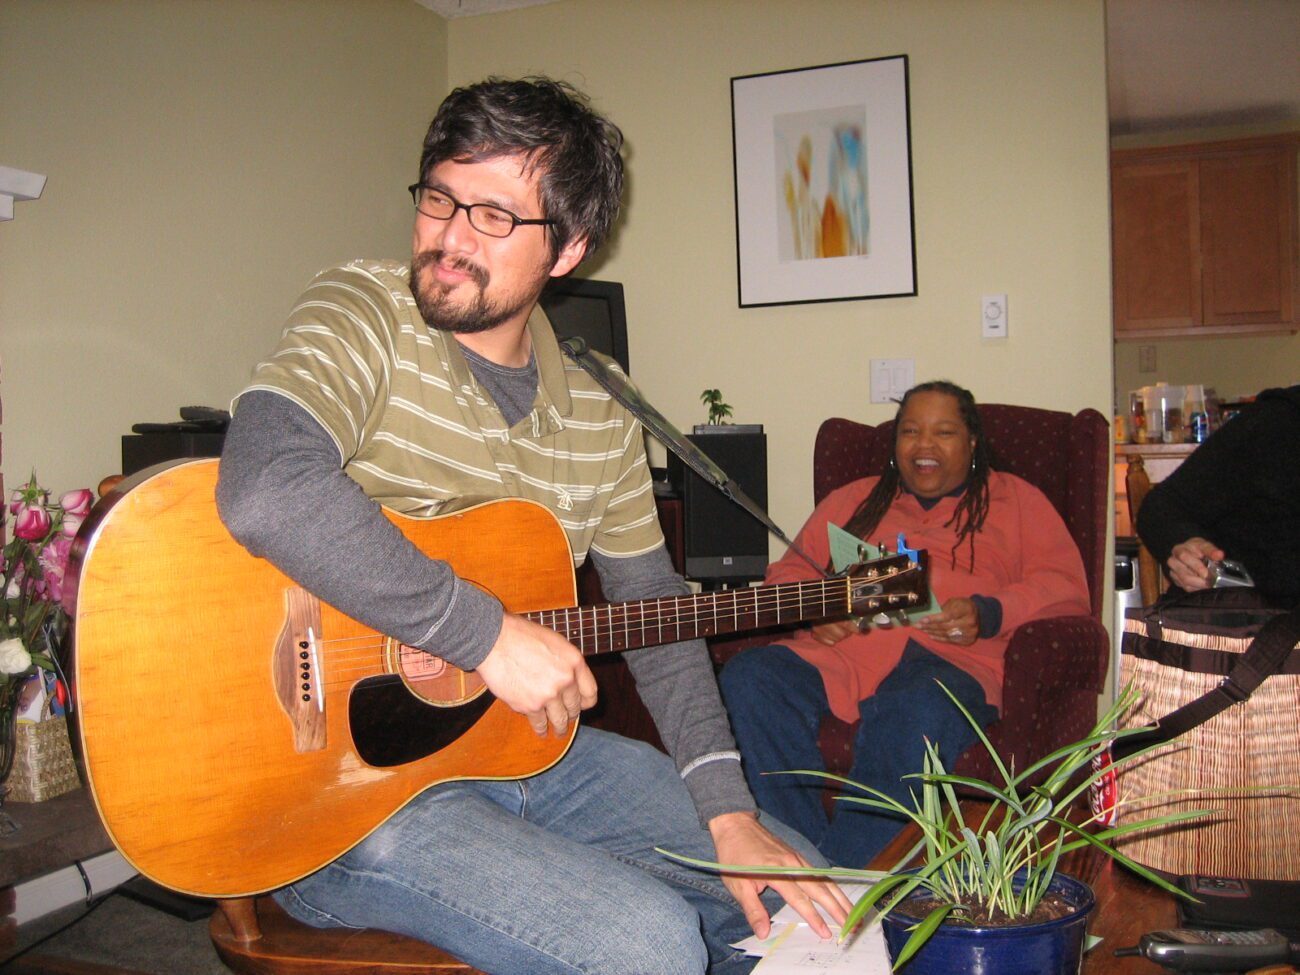 Michael Mathewson is seated on a chair at a gathering in someone's home playing a guitar strapped around his neck